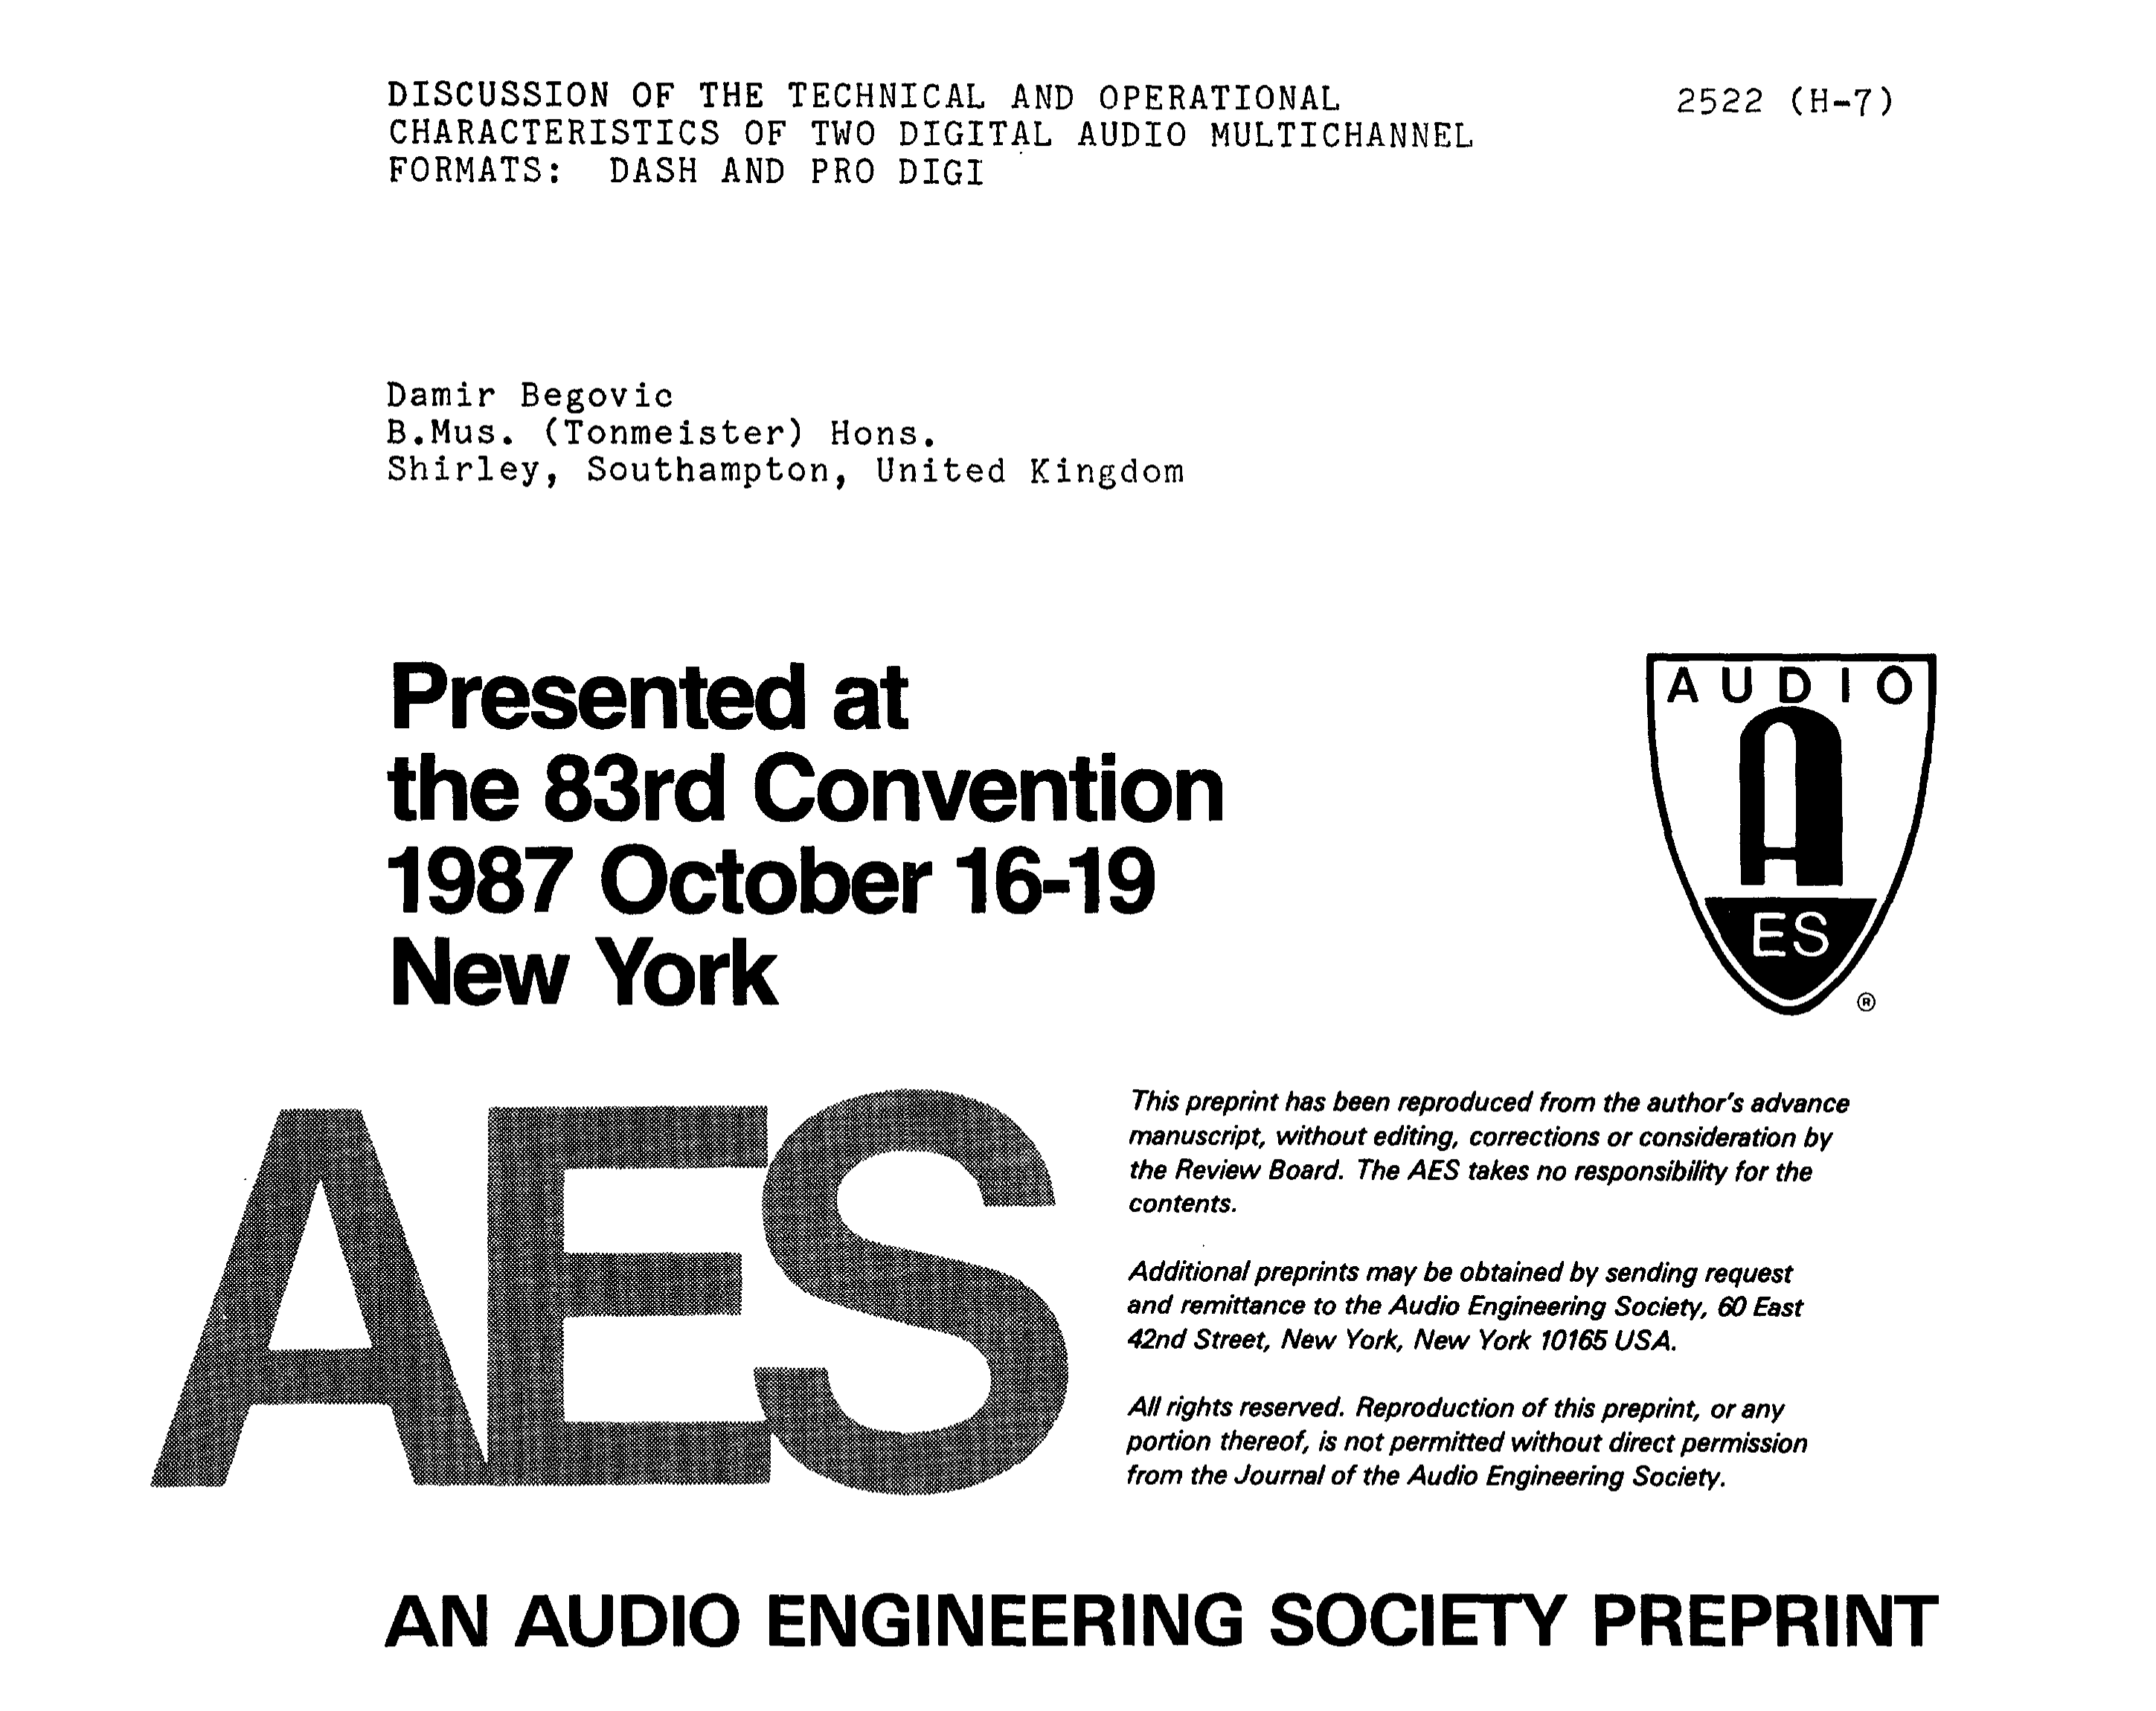 AES E-Library » Discussion of the Technical and Operational